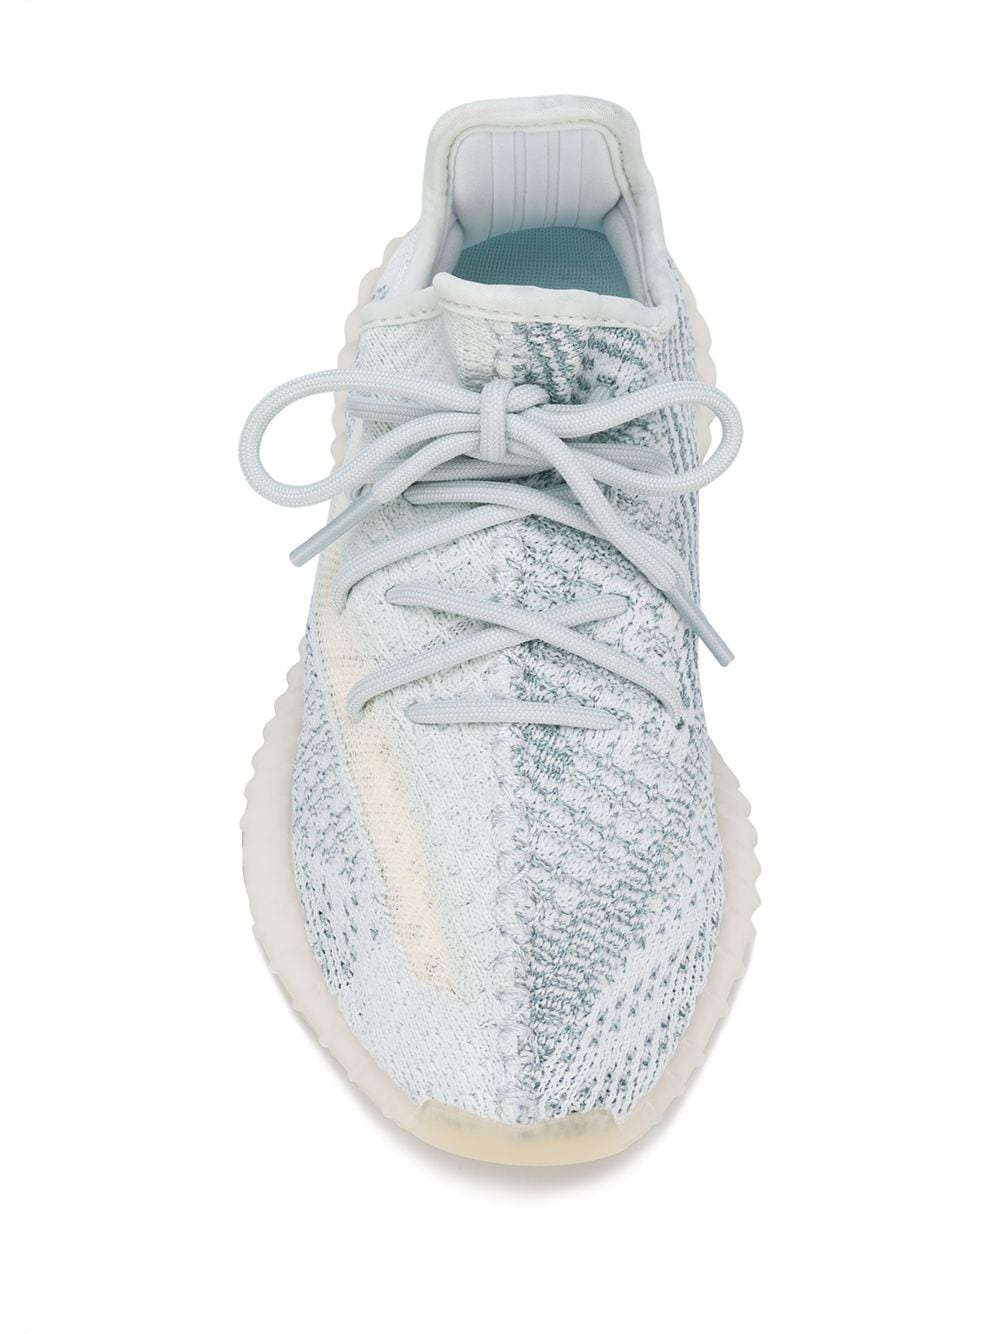 Yeezy Boost 350 V2 "Cloud White" - Reflective - 4